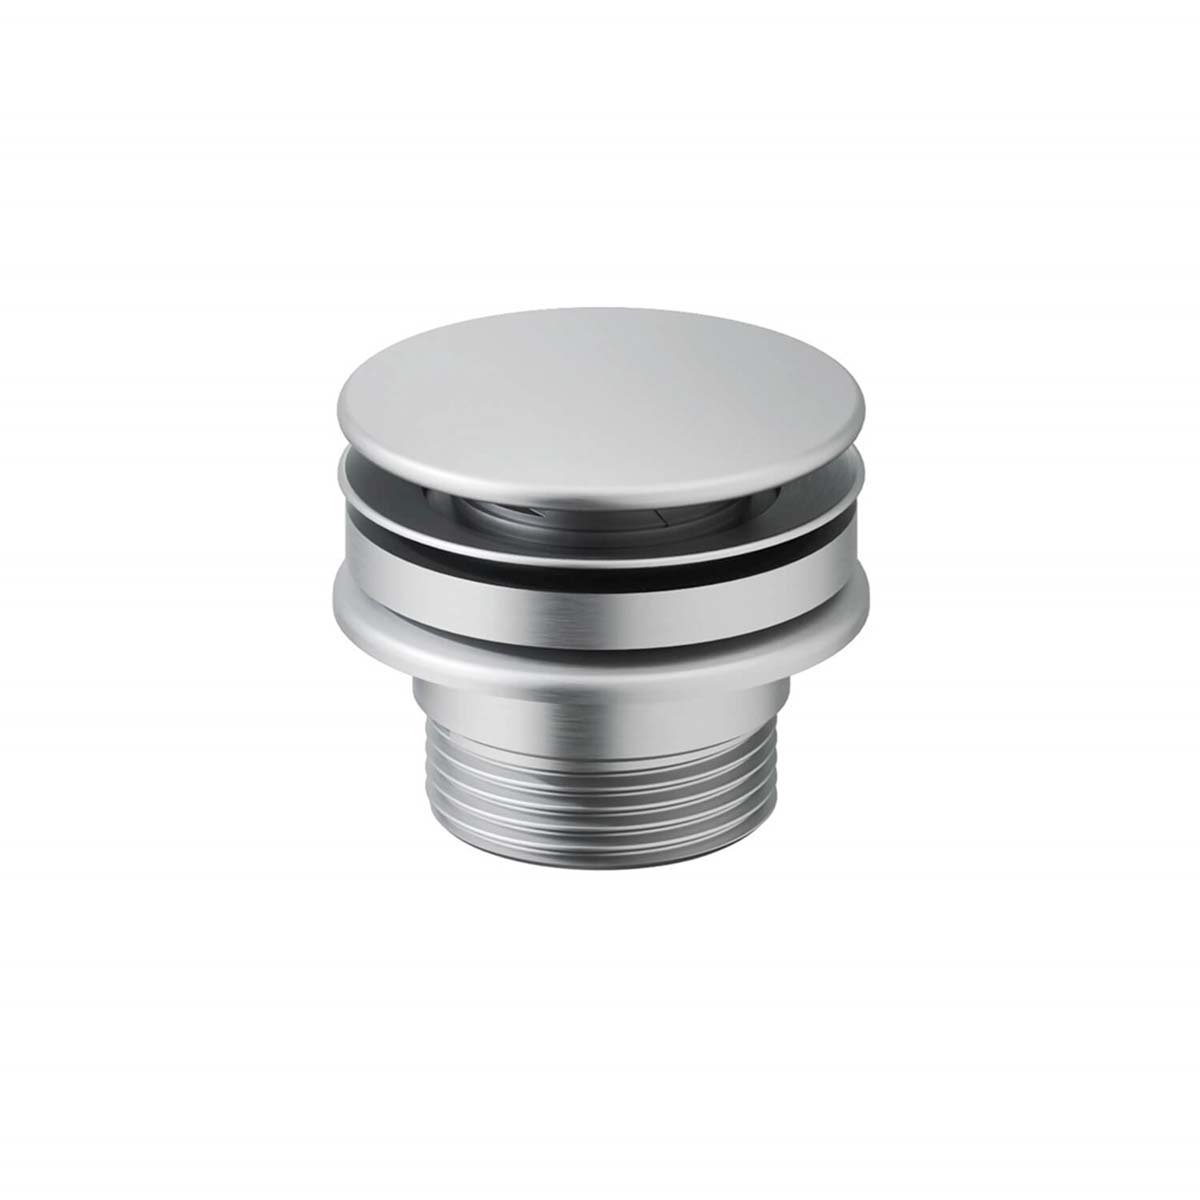 Crosswater 3ONE6 Universal Basin Click-Clack Waste - 316 Stainless Steel